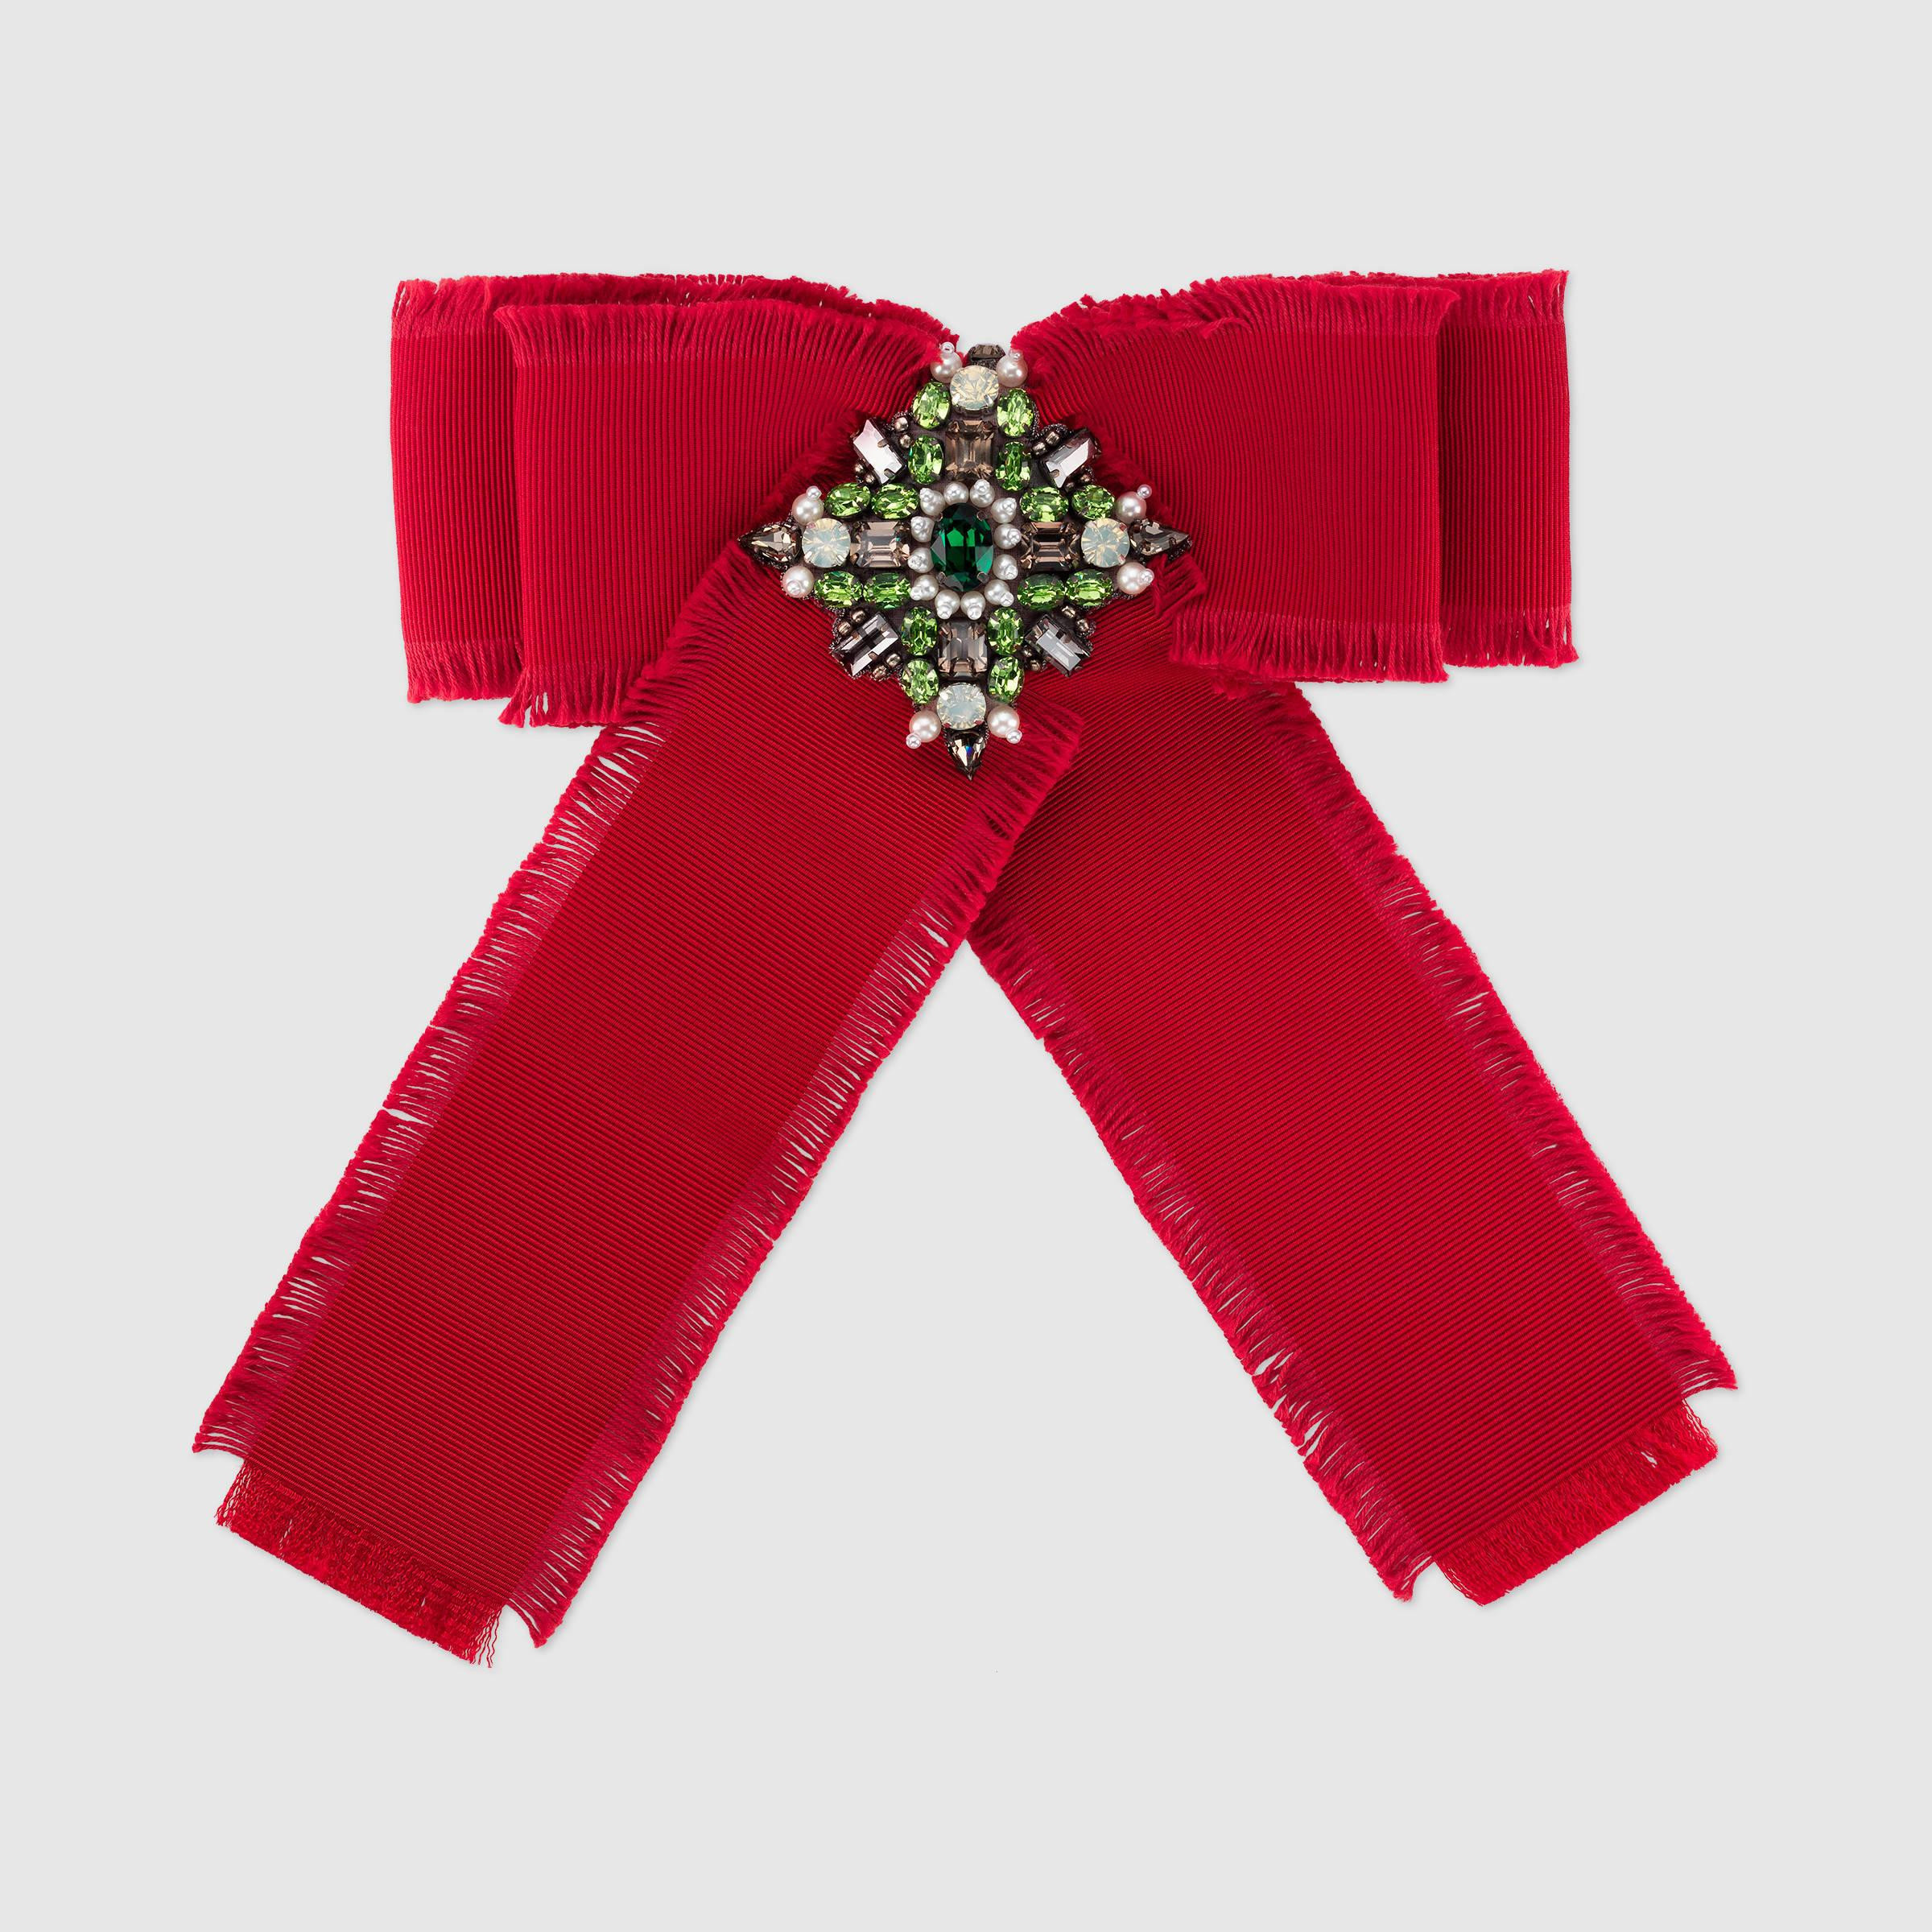 Gucci Brooches
 Gucci Grosgrain Bow Brooch in Red